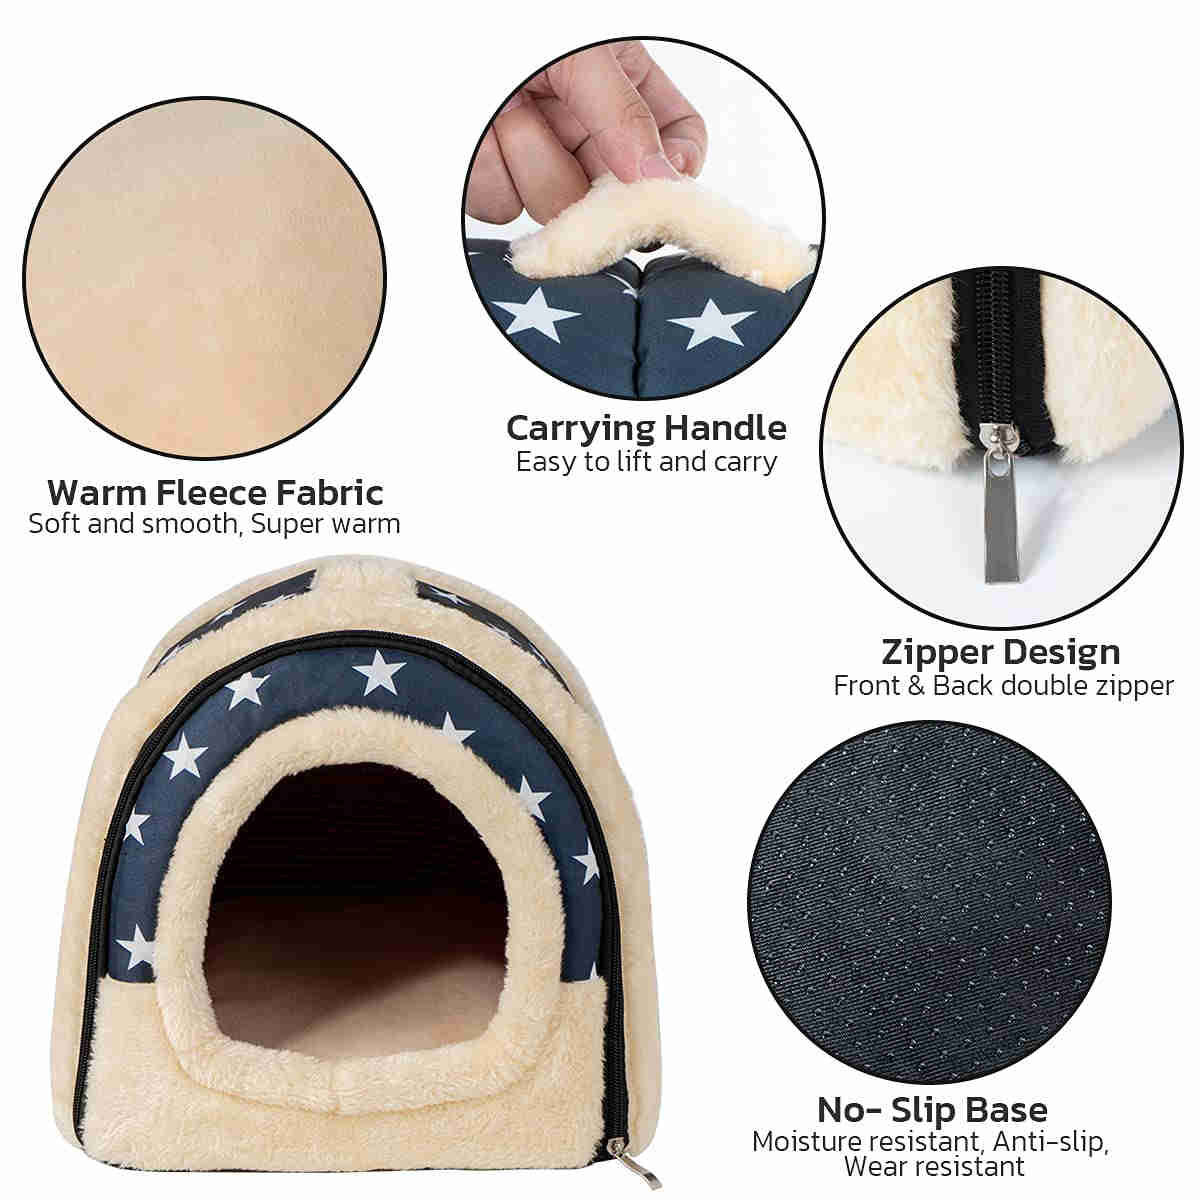 Guinea Pig Hideout，Bunny Bed, Small Animal Bed, Small Animal Bed, 1 Pack (BlueStars)